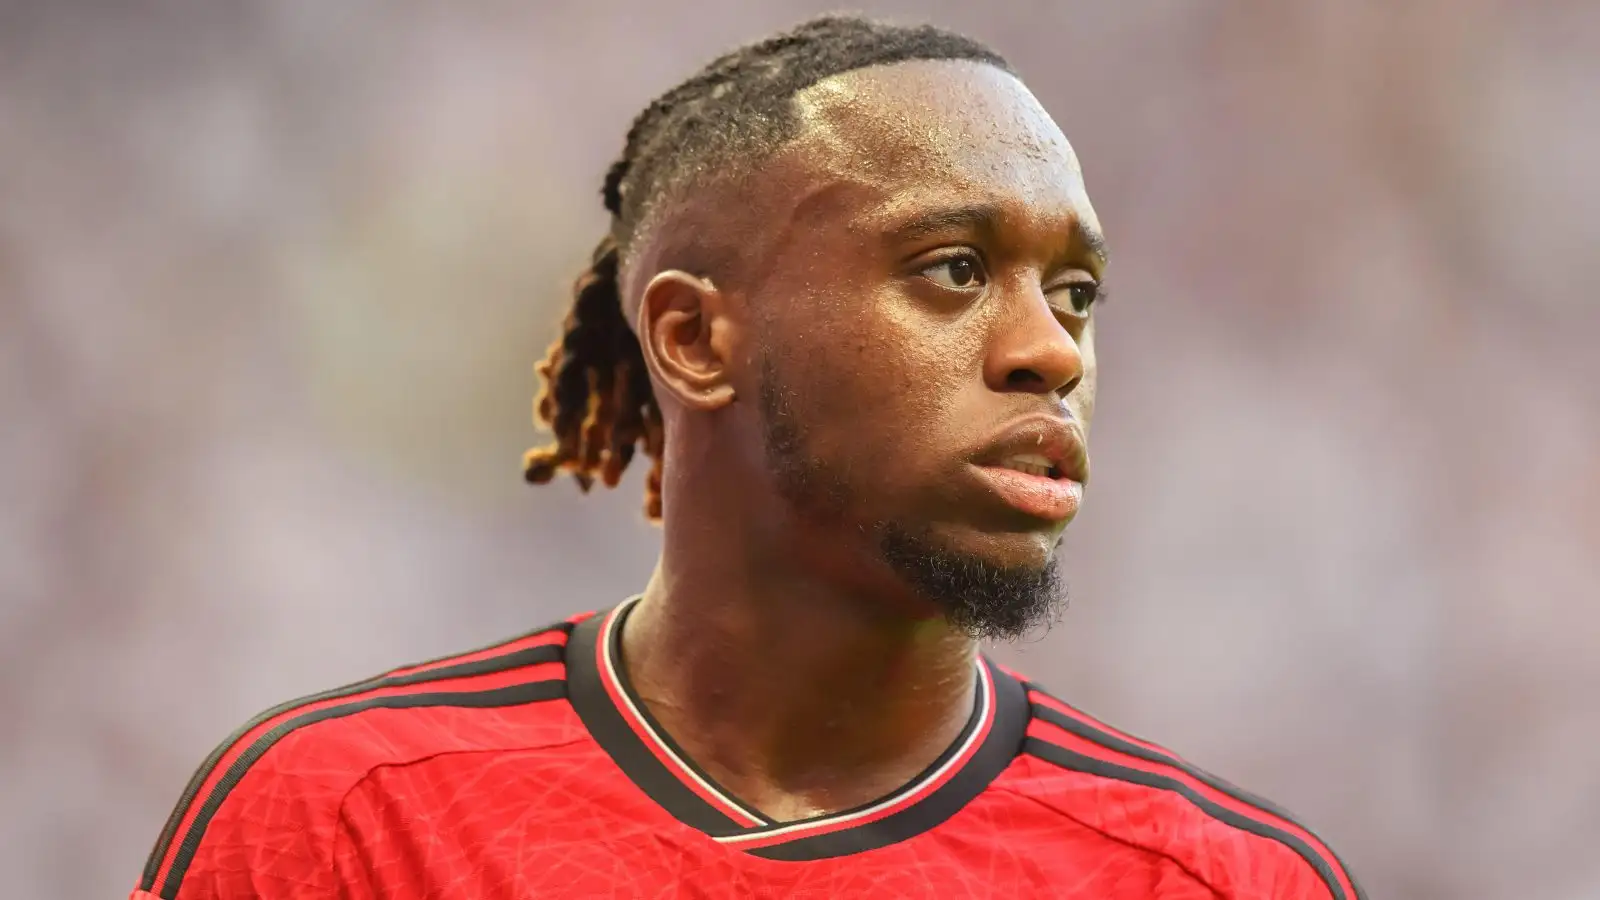 Aaron Wan-Bissaka during a match for Manchester United.